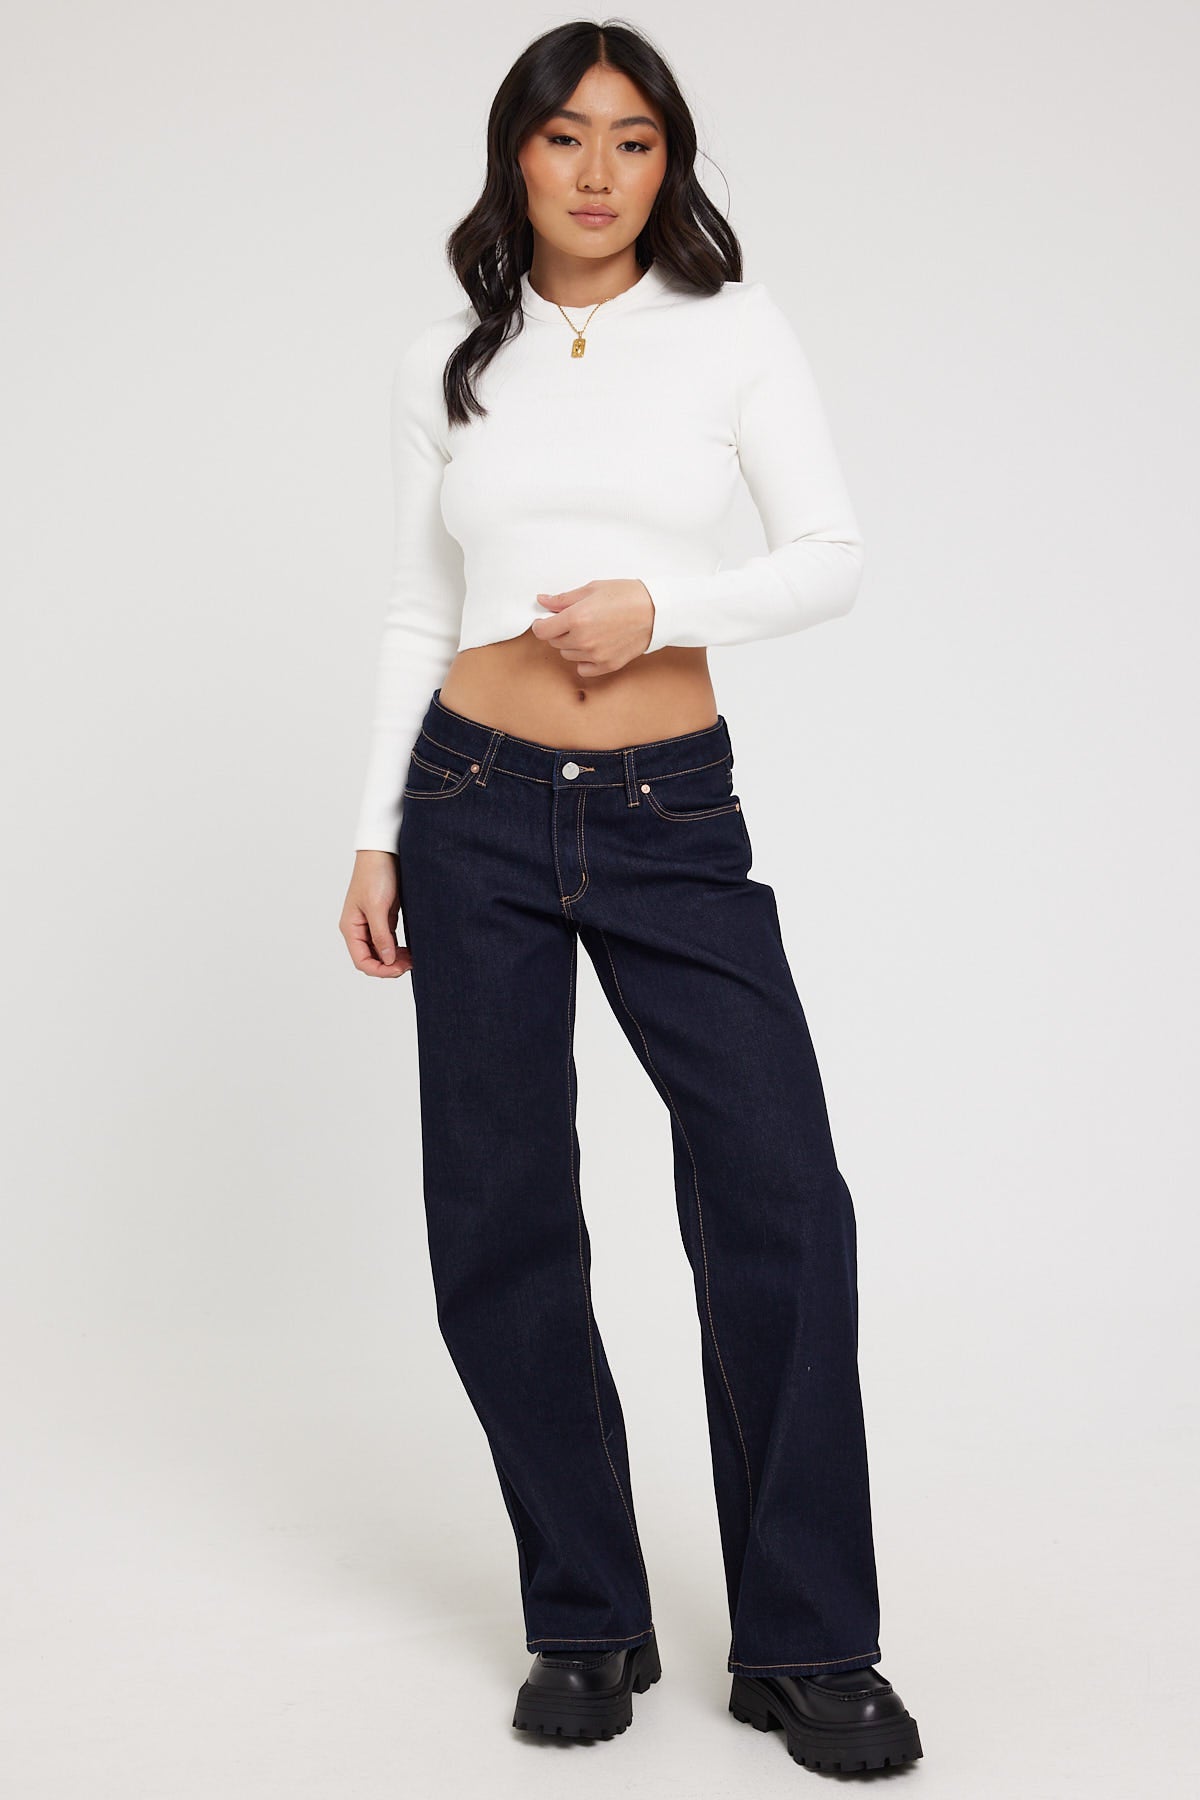 Abrand A Heather Long Sleeve Top White